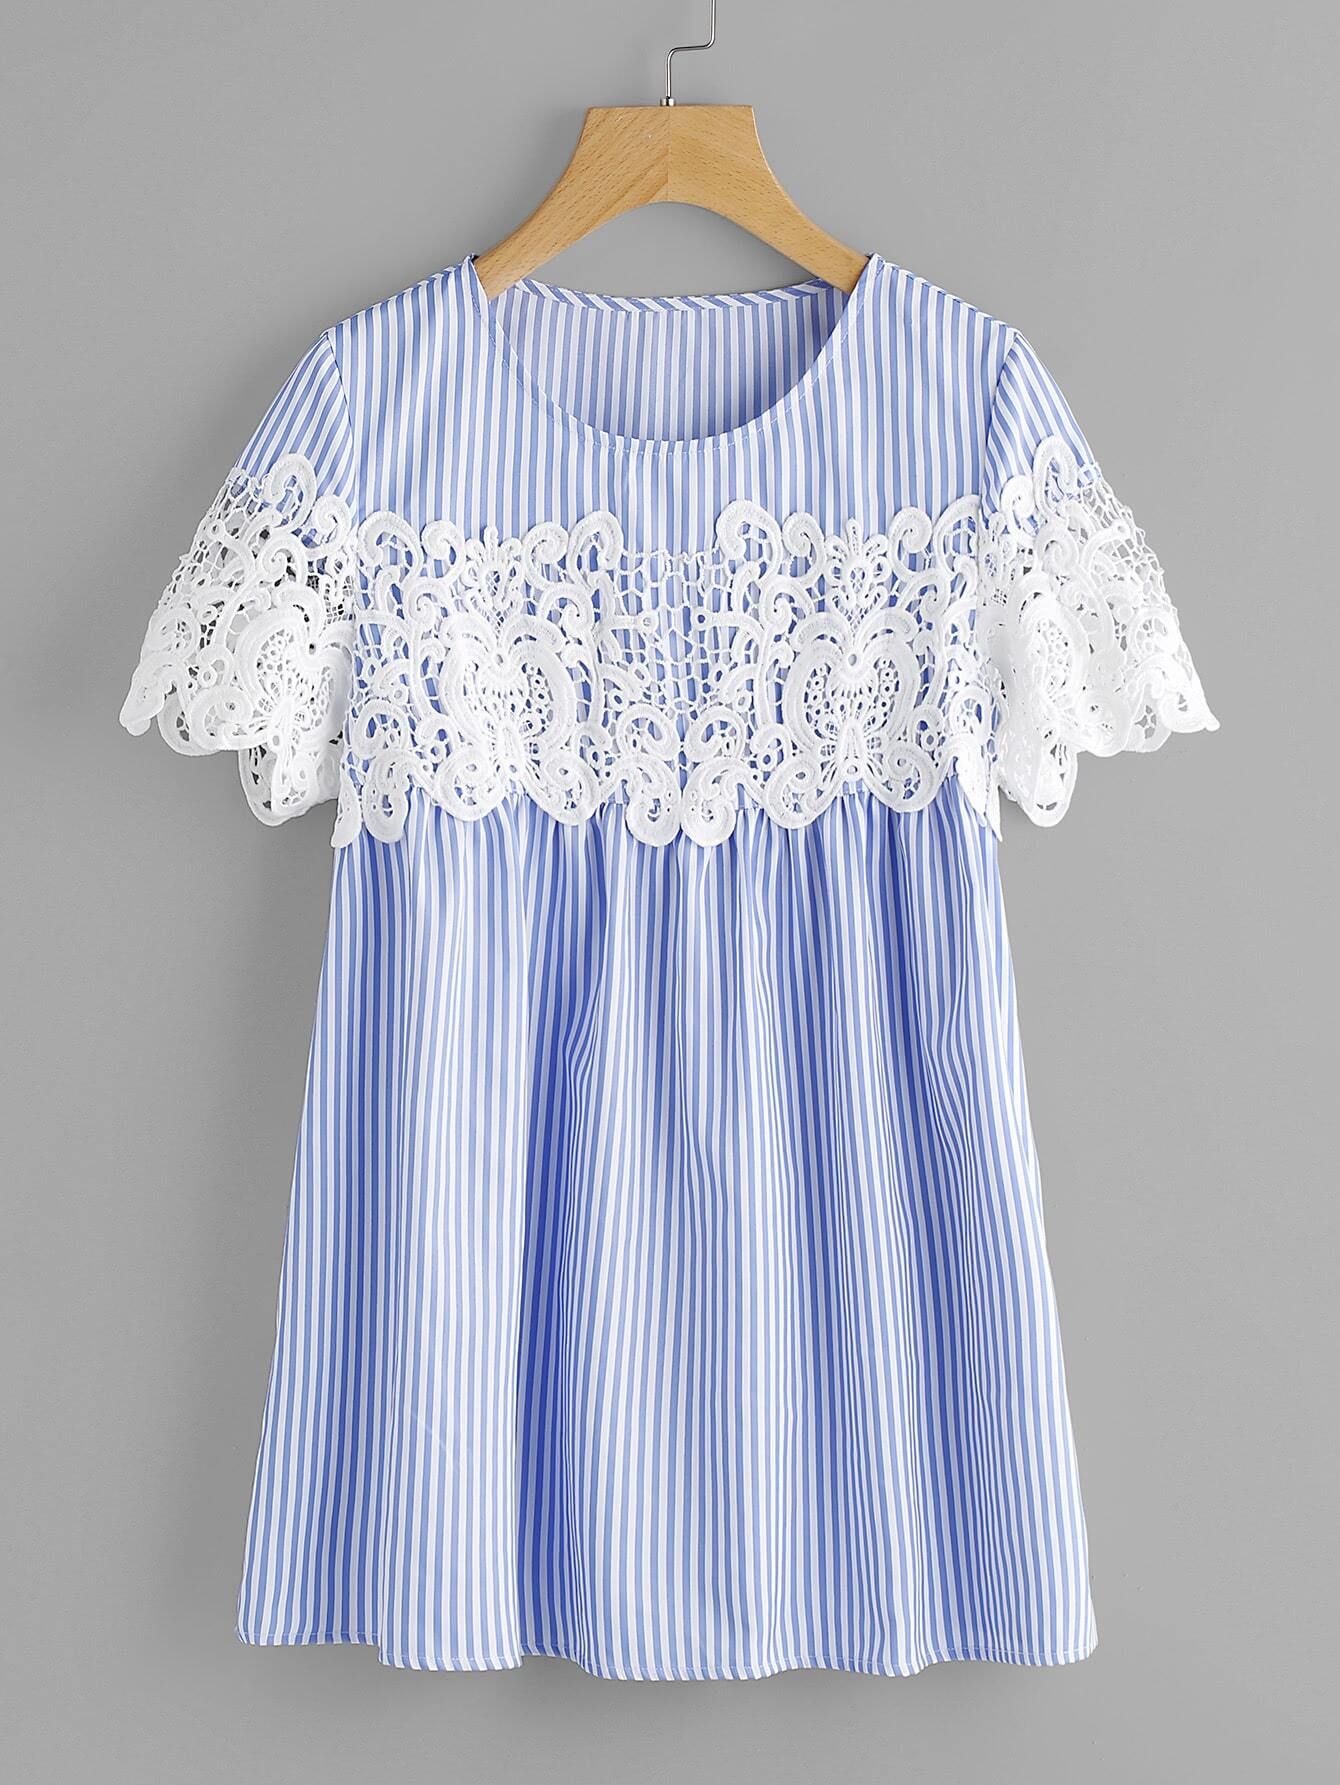 Lace Applique Striped Smock Top | SHEIN